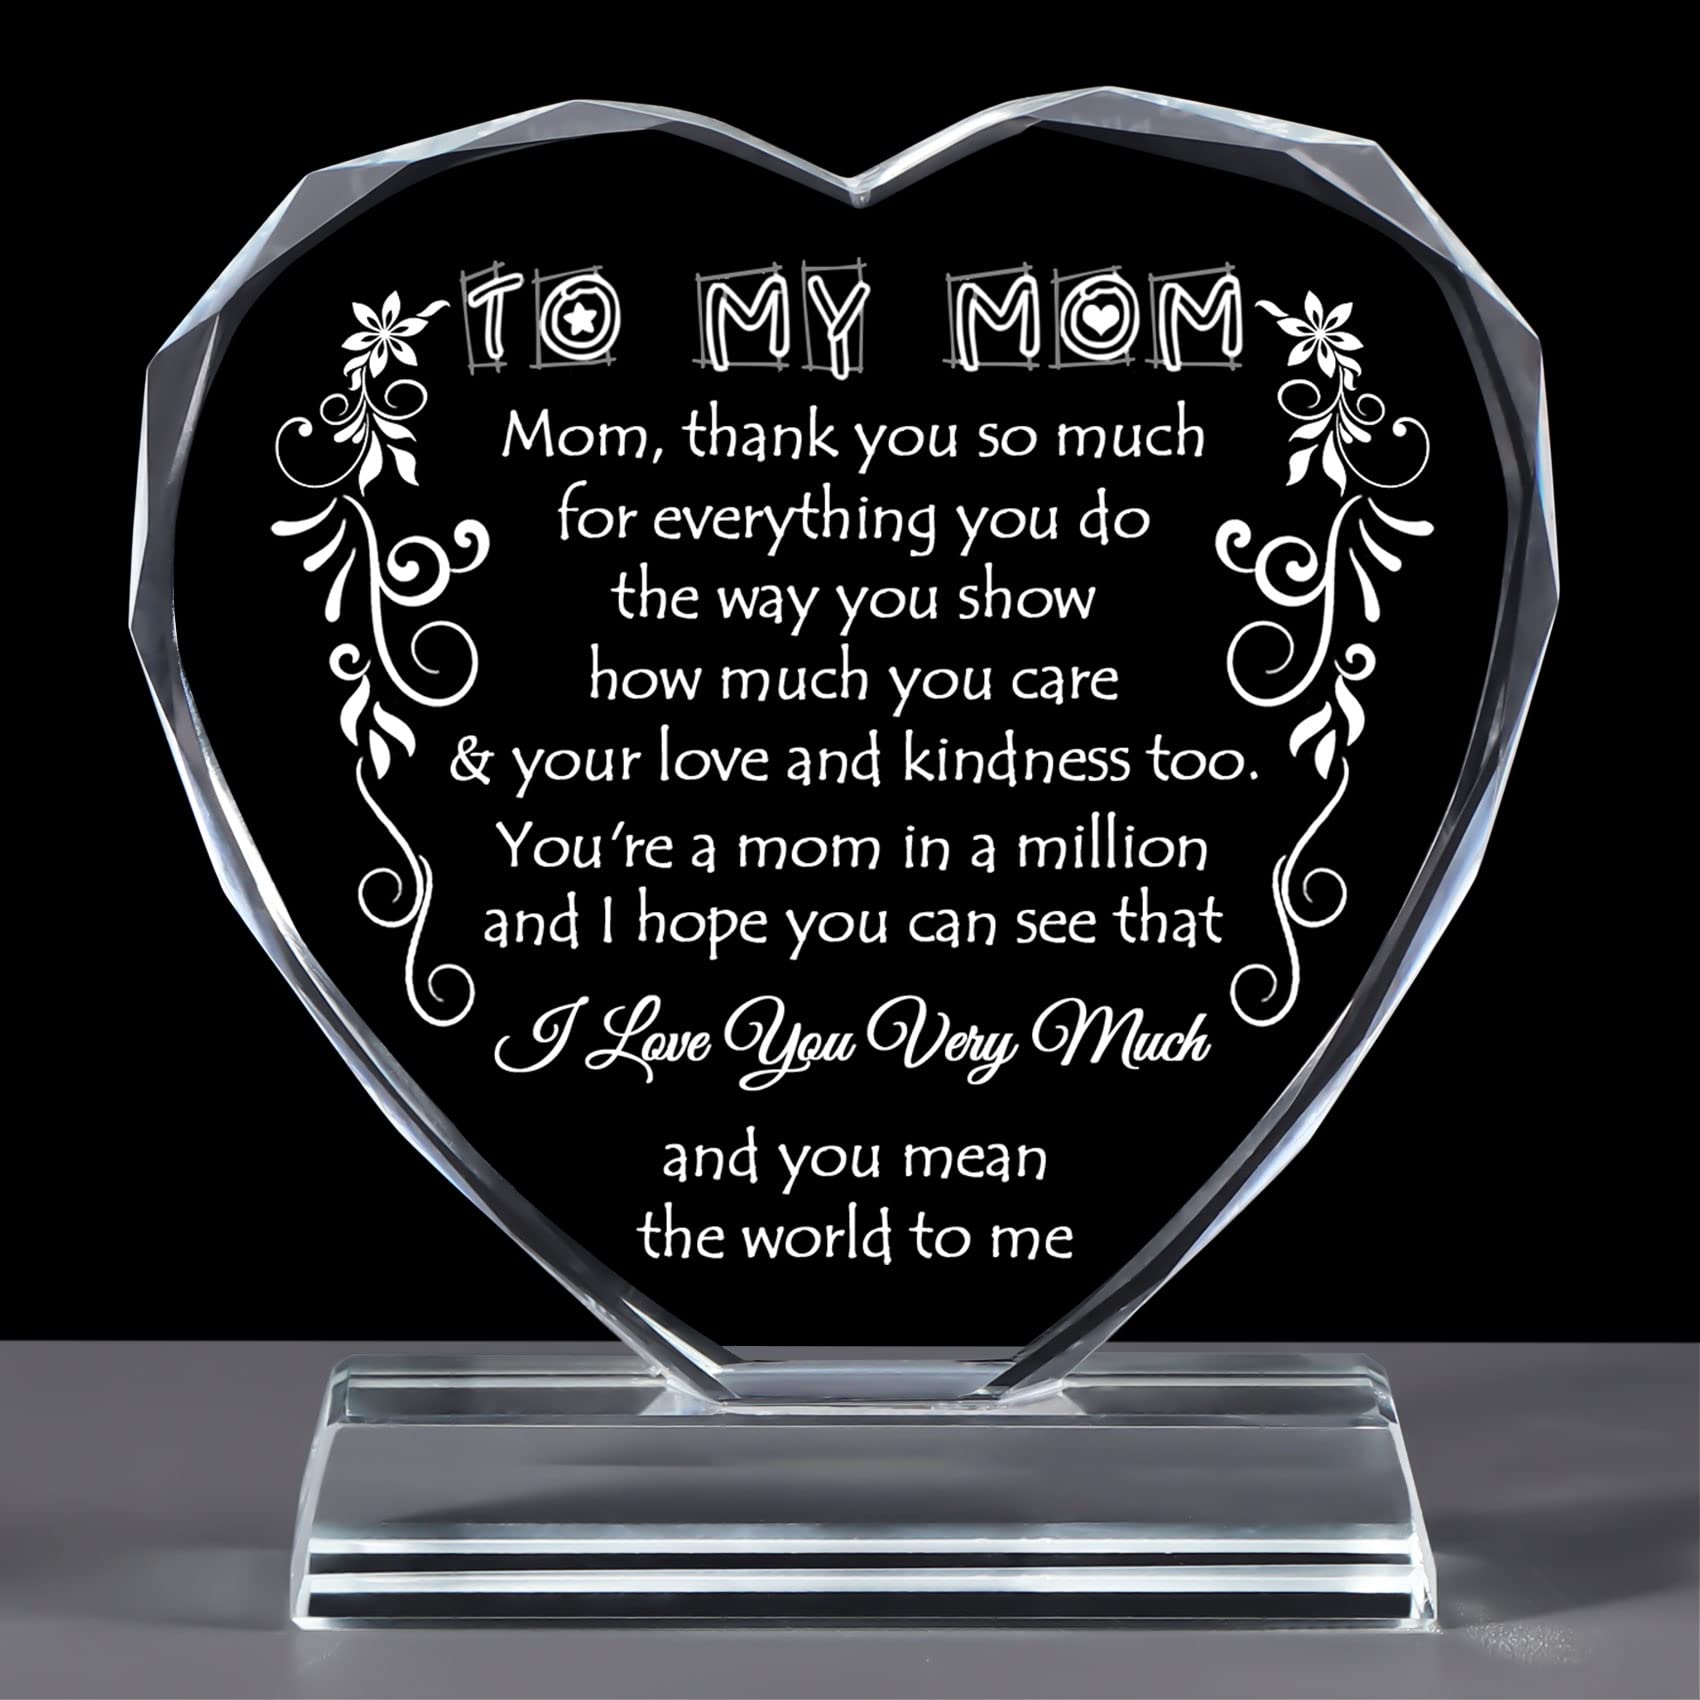 Mother's Day Gift Idea Best Gift For Mom With Amazing Quote - Oh